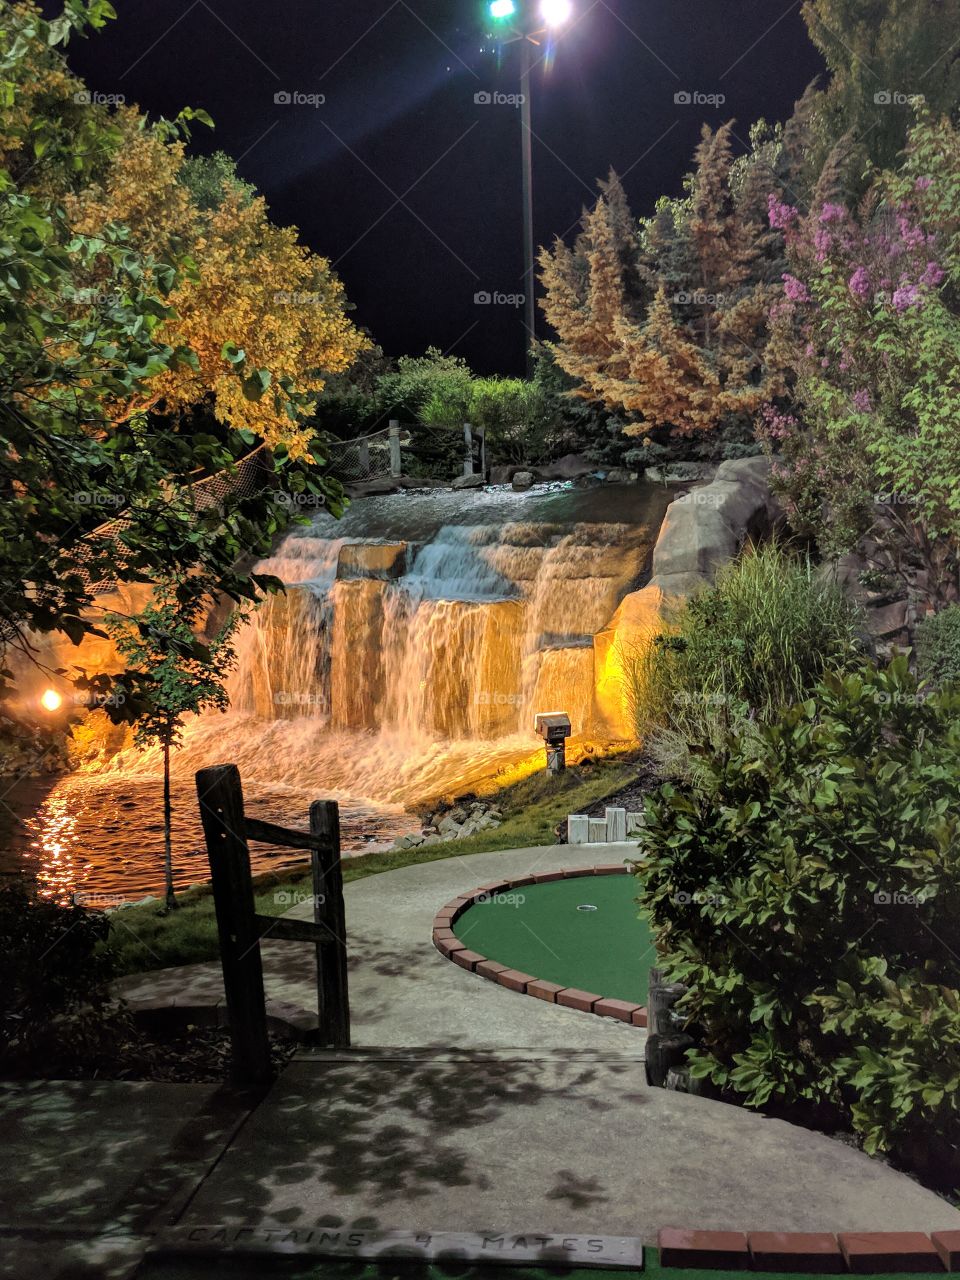 Waterfall at Pirates cove Mini golf course